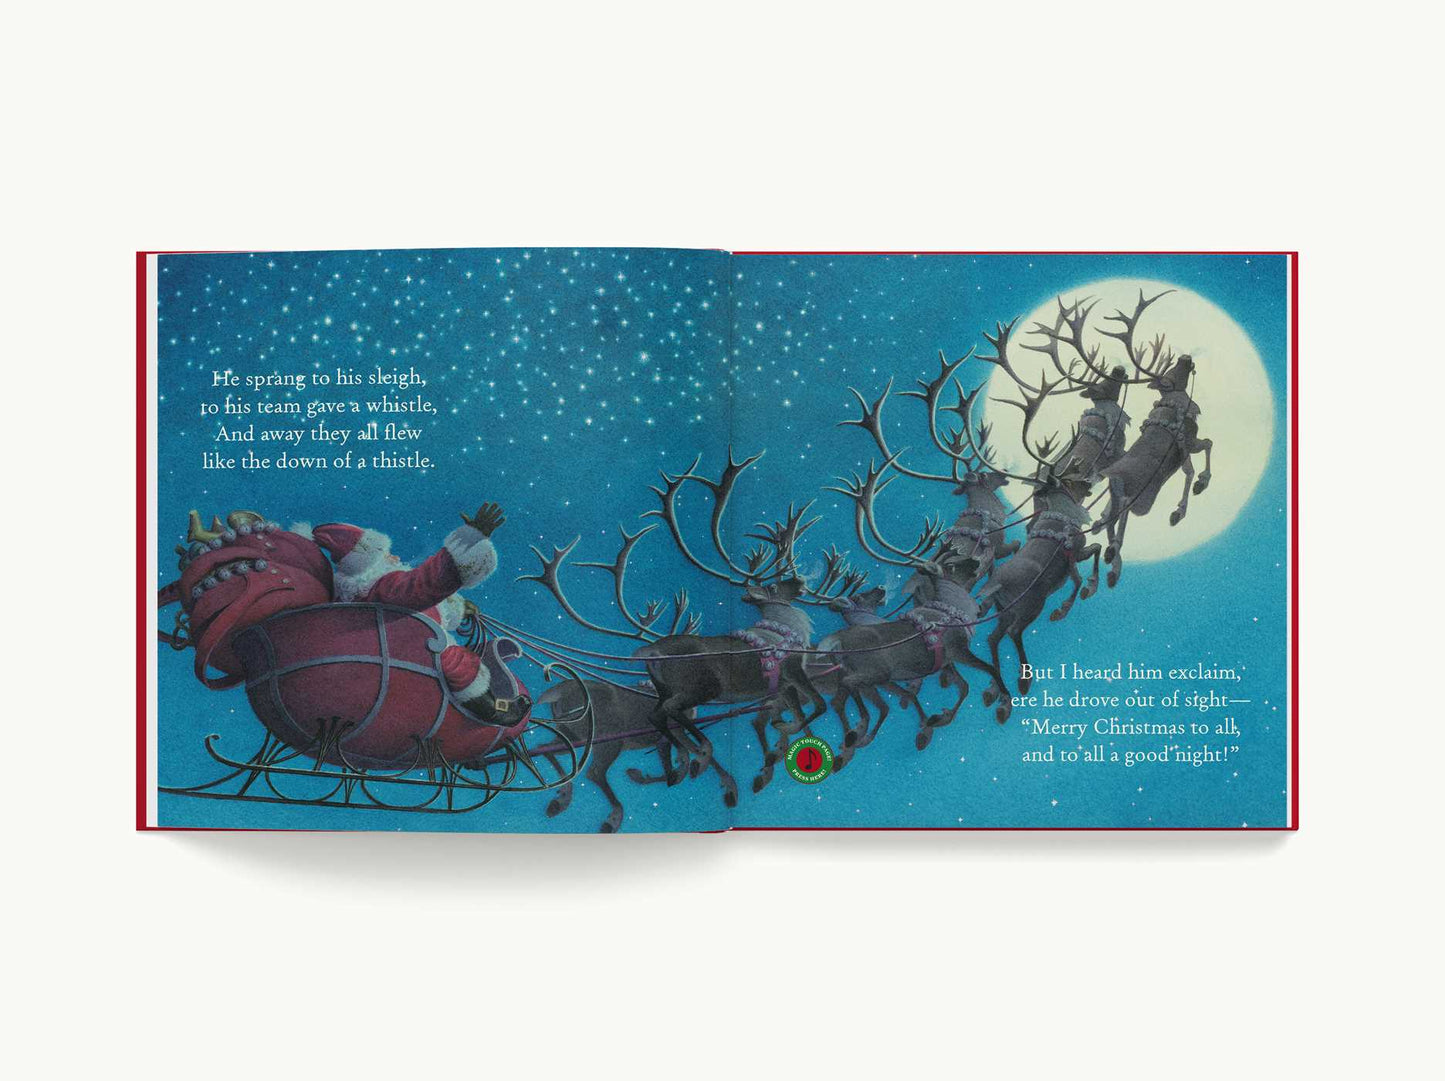 The Night Before Christmas Recordable Edition: A Recordable Storybook